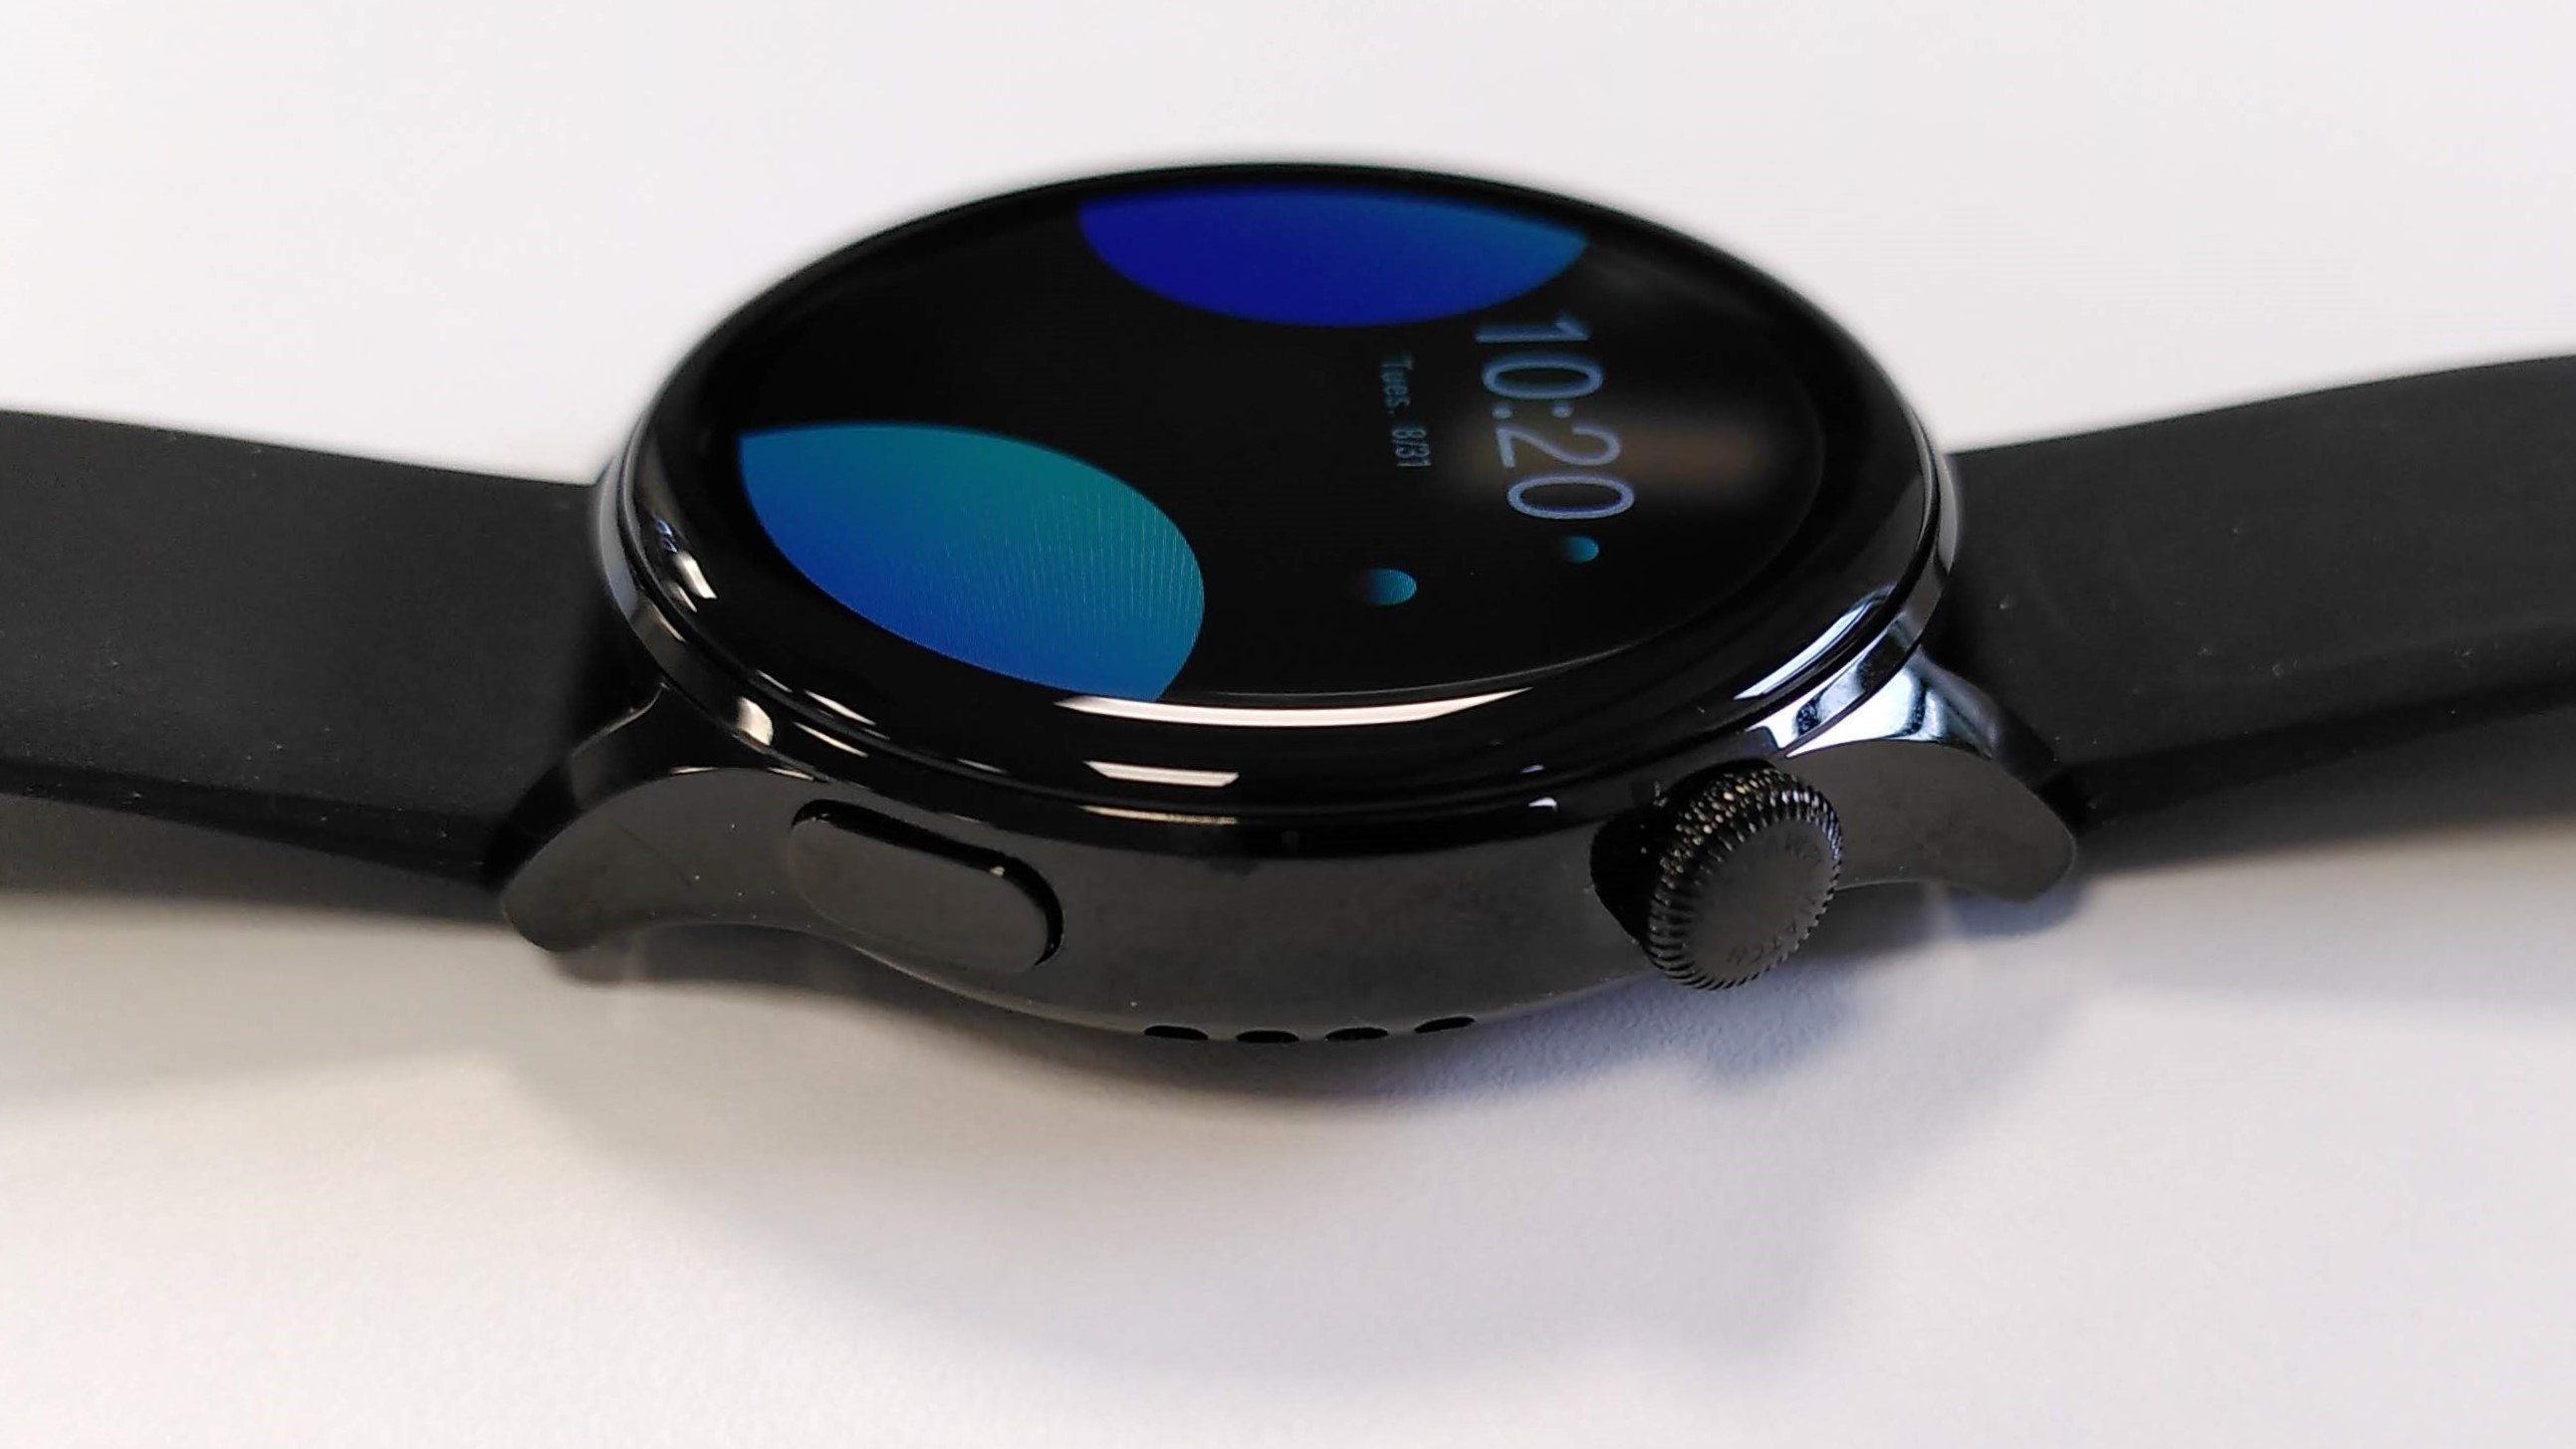 Huawei Watch 3 side profile, showing crown and button